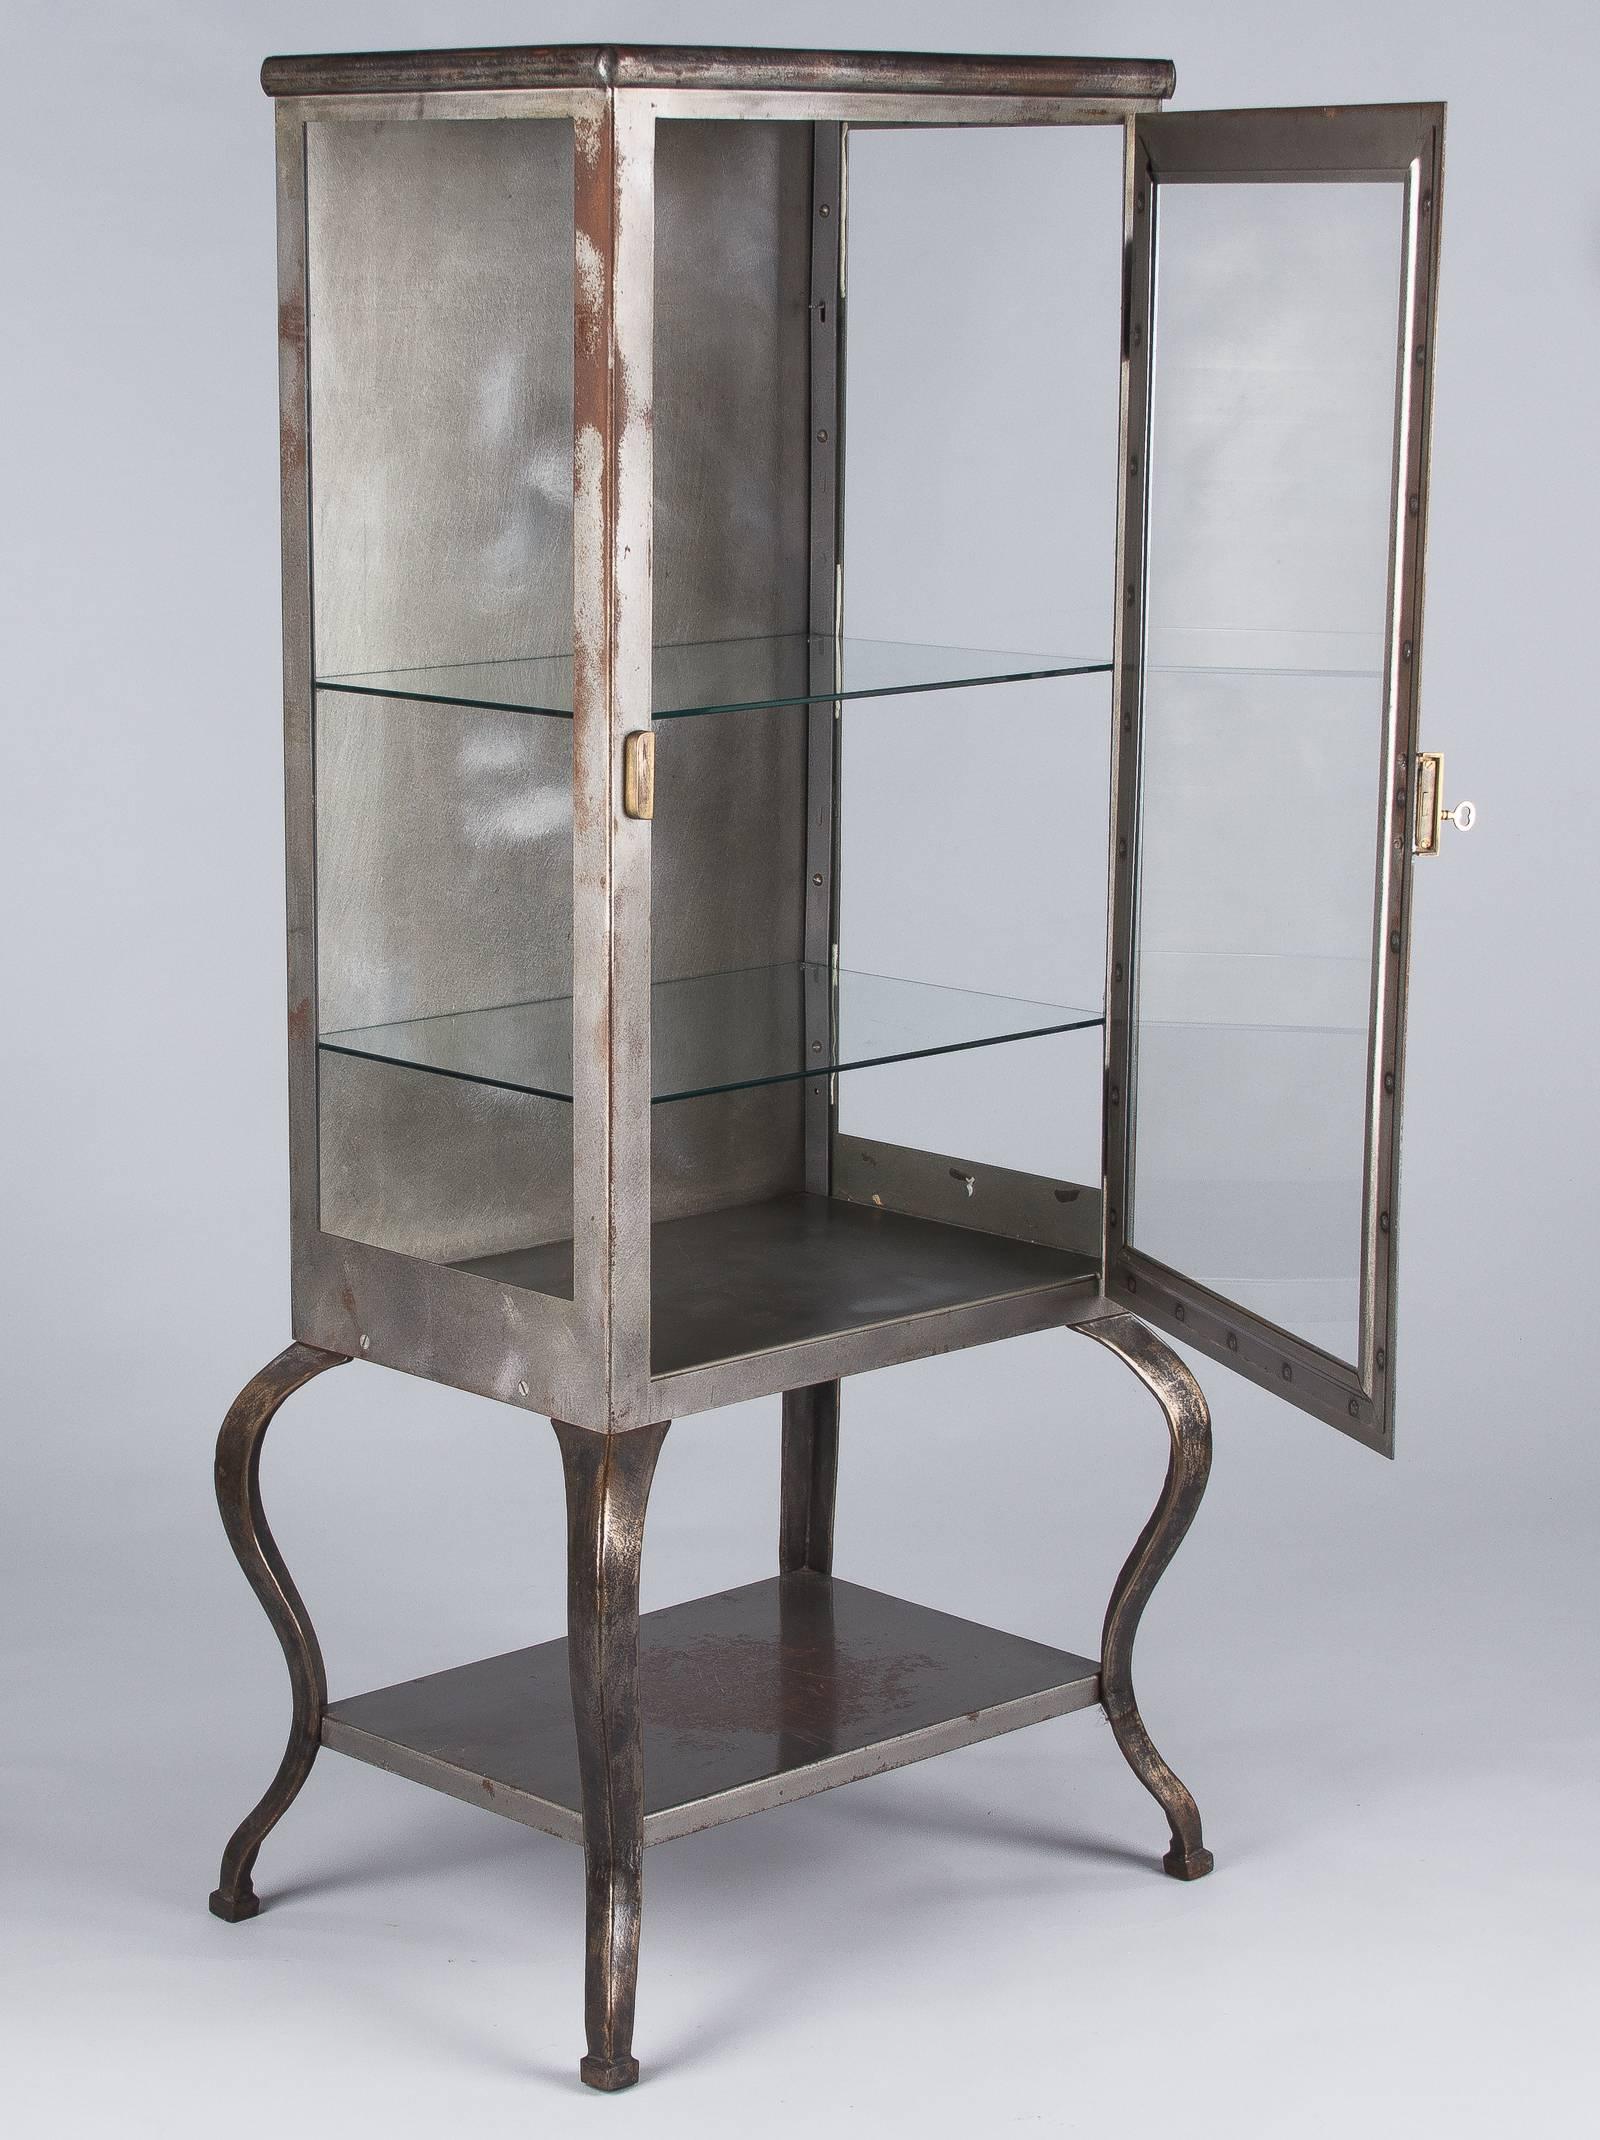 American Industrial Apothecary Polished Steel Vitrine, 1940s